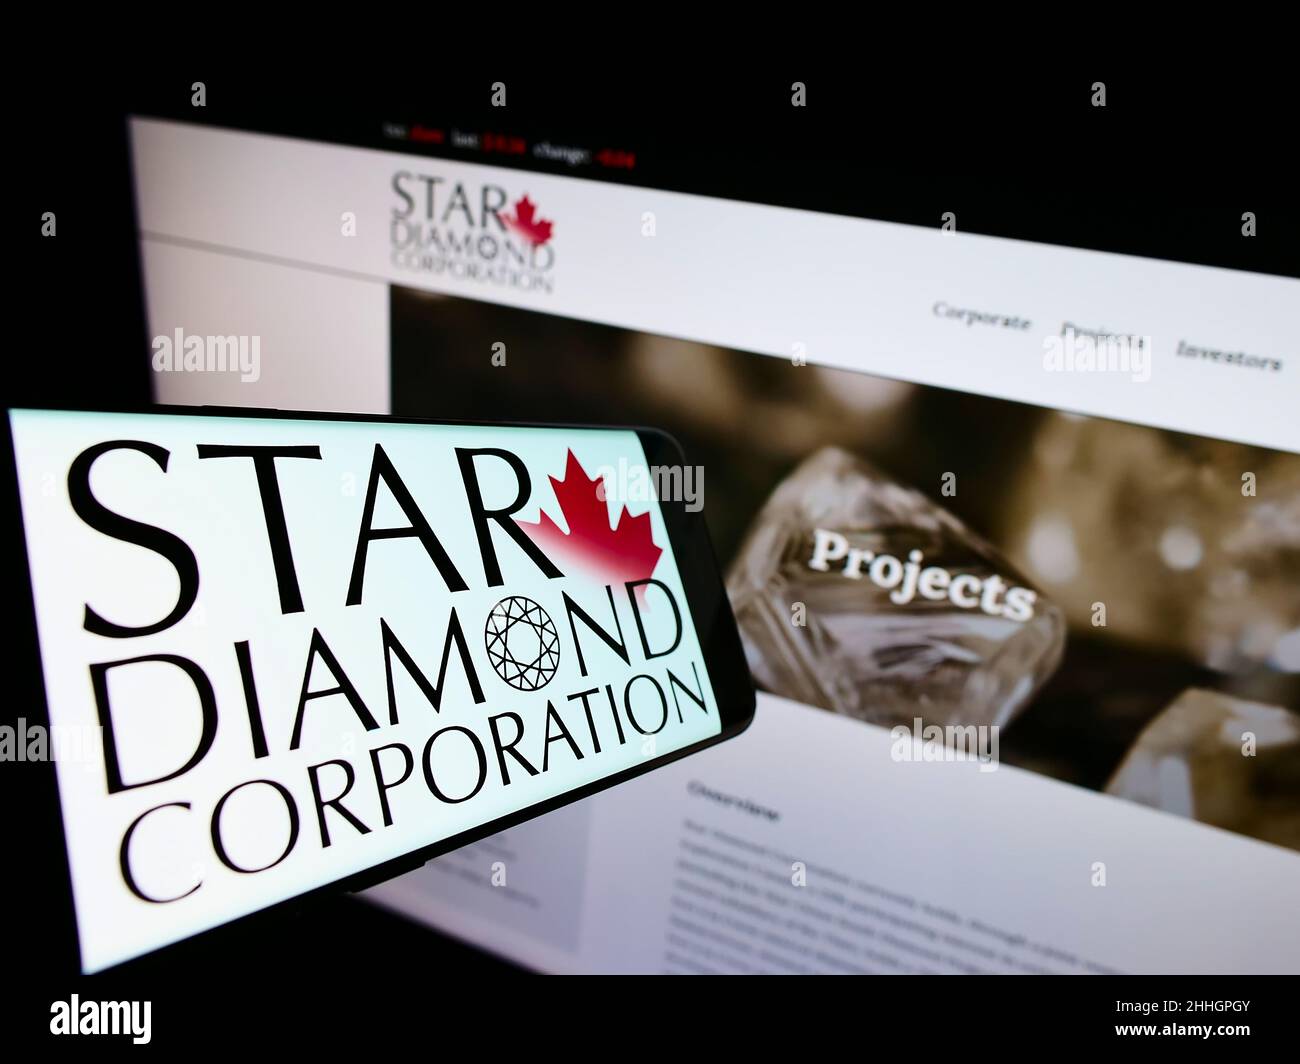 Smartphone with logo of Canadian mining company Star Diamond Corporation on screen in front of website. Focus on center-right of phone display. Stock Photo